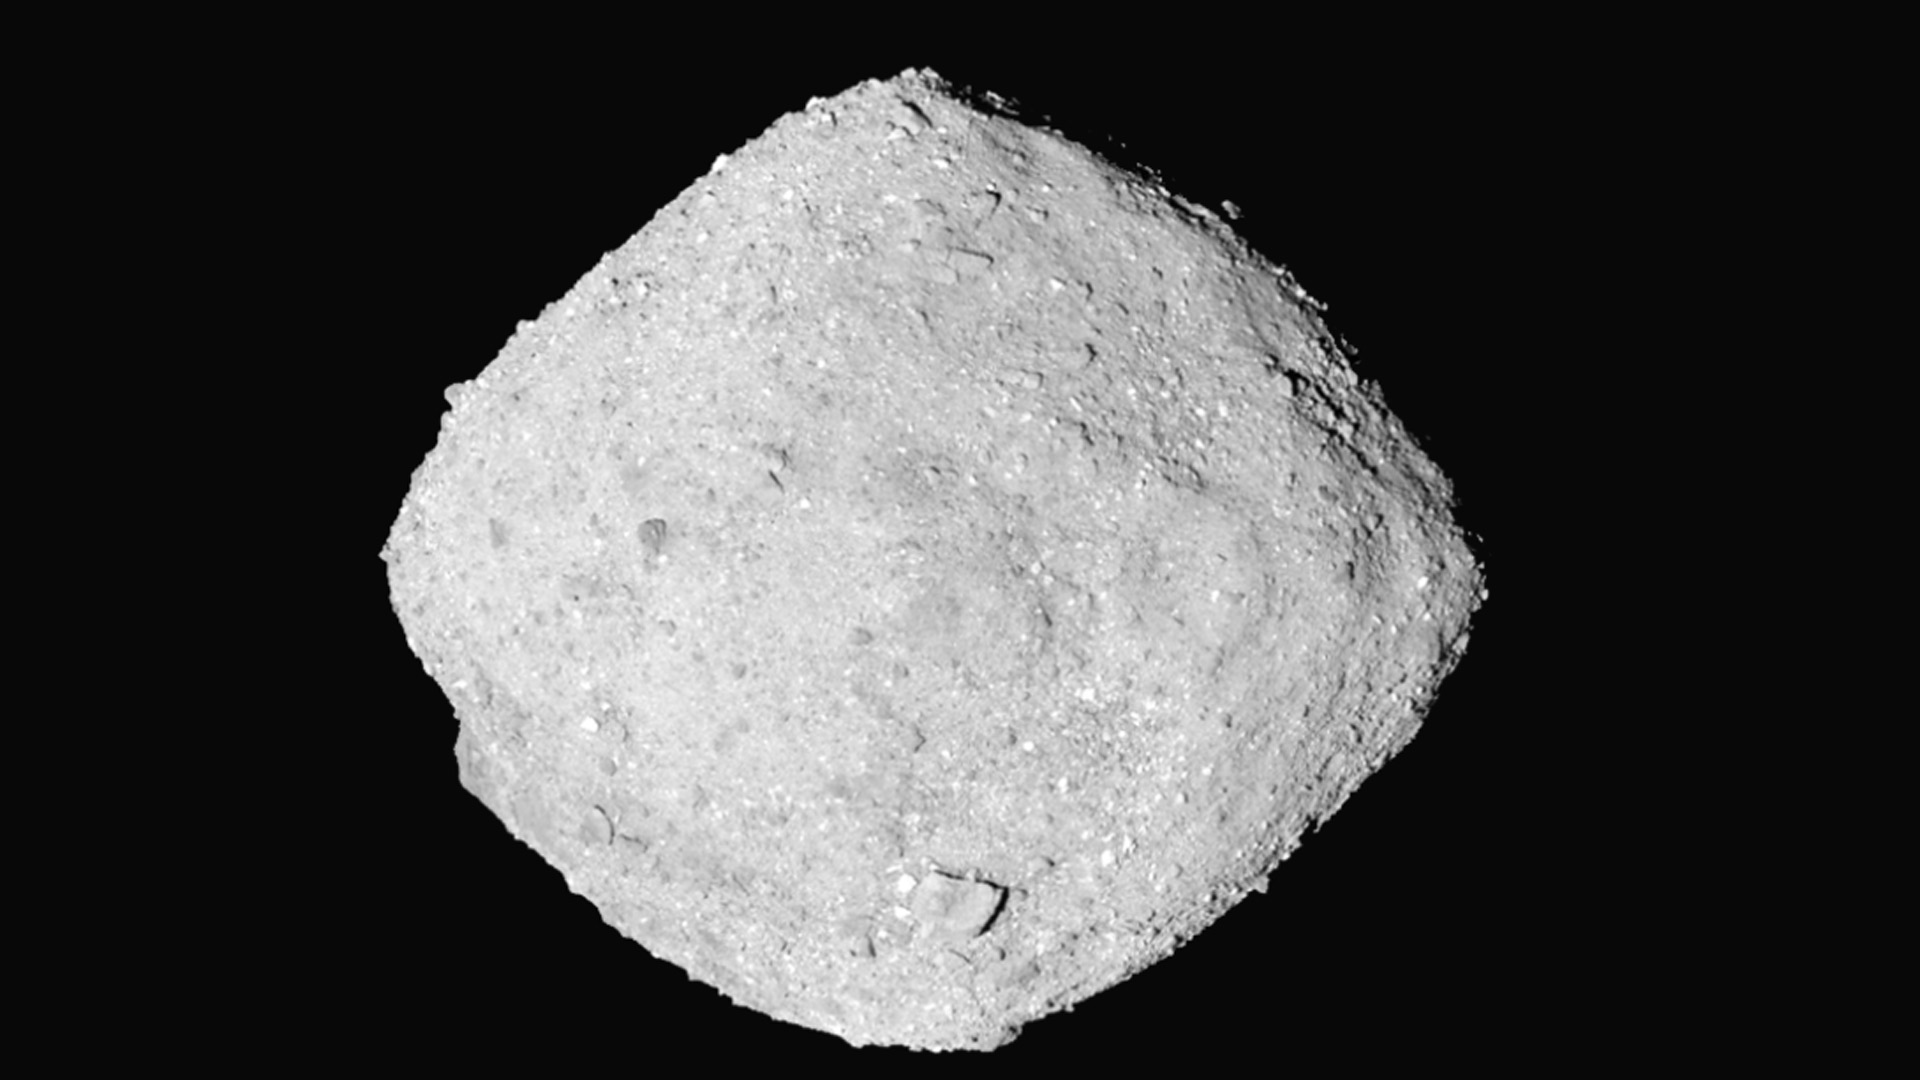 The asteroid Bennu from the final approach of the OSIRIS-REx spacecraft.

